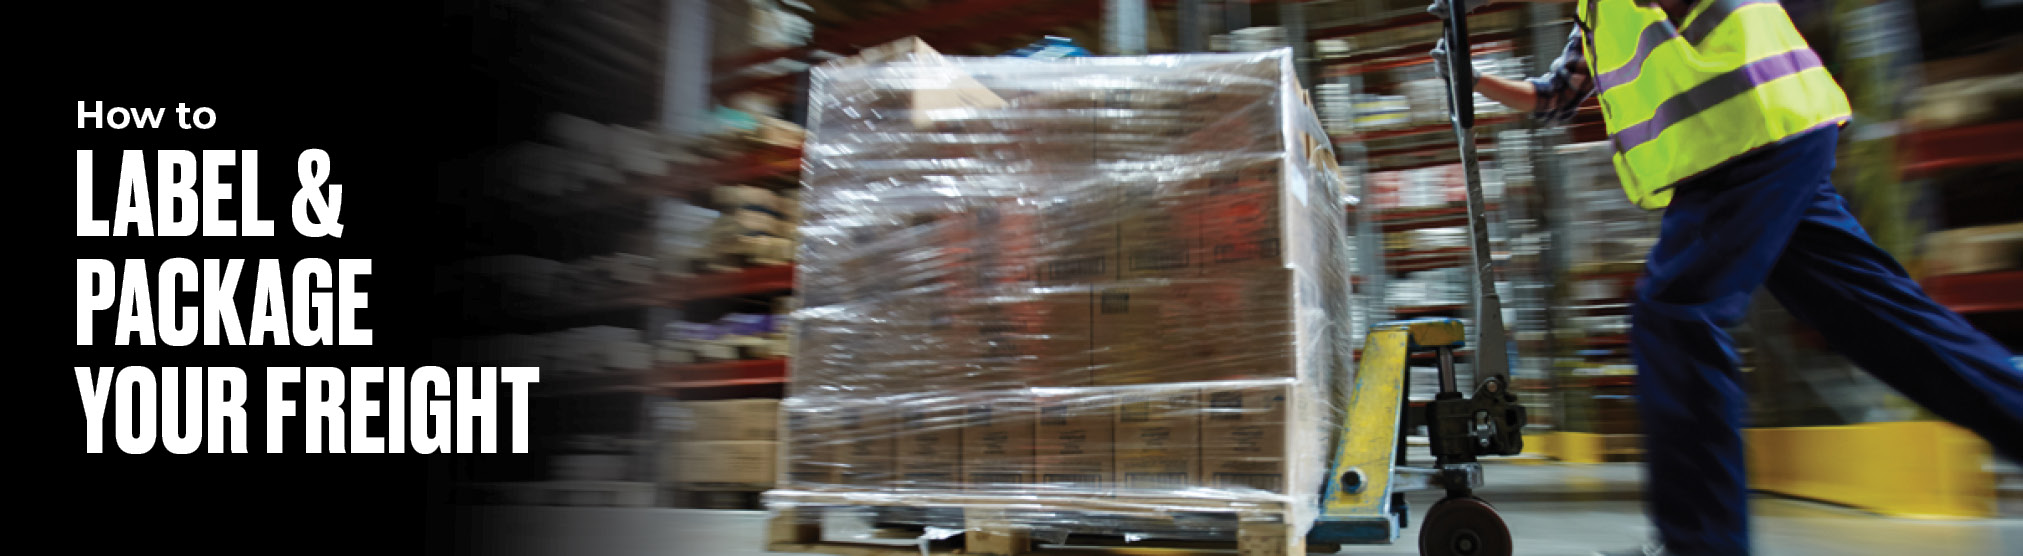 HowToPackageFreight_Banner